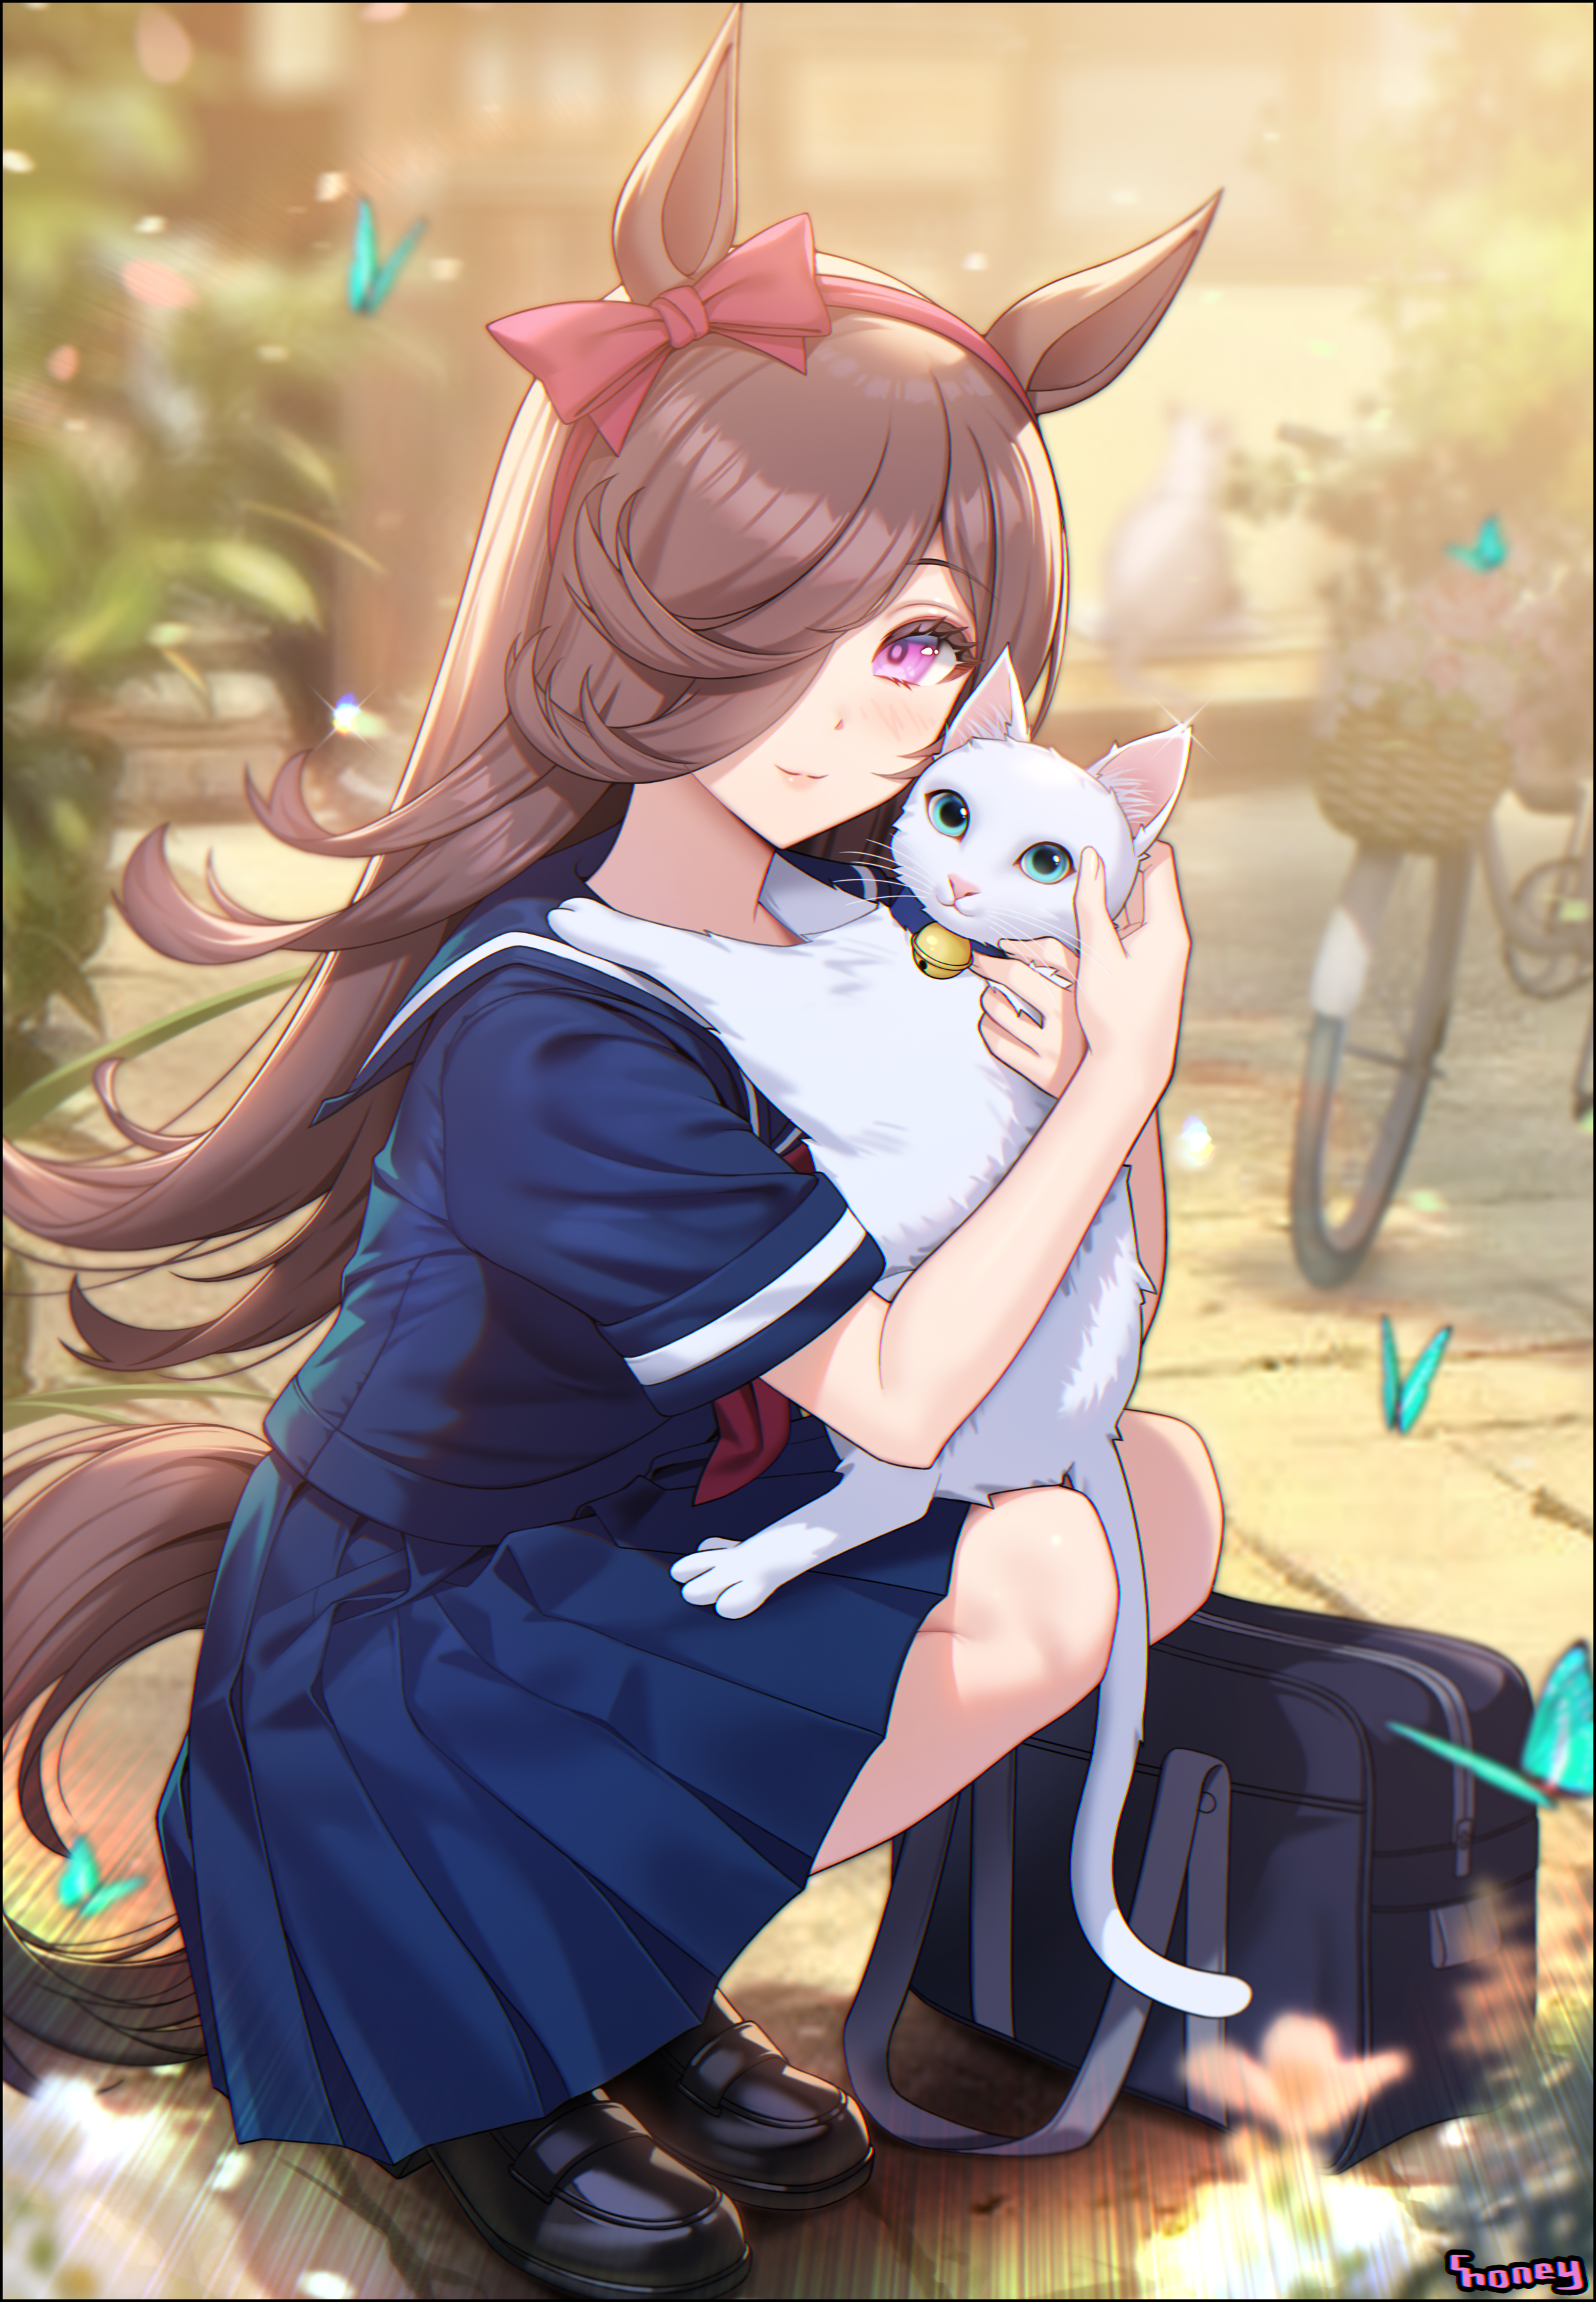 Anime 2432x3508 Uma Musume Pretty Derby hair over one eye cats school uniform thighs animal ears black footwear purple eyes bicycle butterfly depth of field solo squatting looking at viewer brunette long hair anime girls Rice Shower (Uma Musume) pink lipstick bag women with cat portrait display anime loli blushing women outdoors fan art artwork 2D blurry background Choney horse girls headband hairband hair in face animals mammals Pixiv